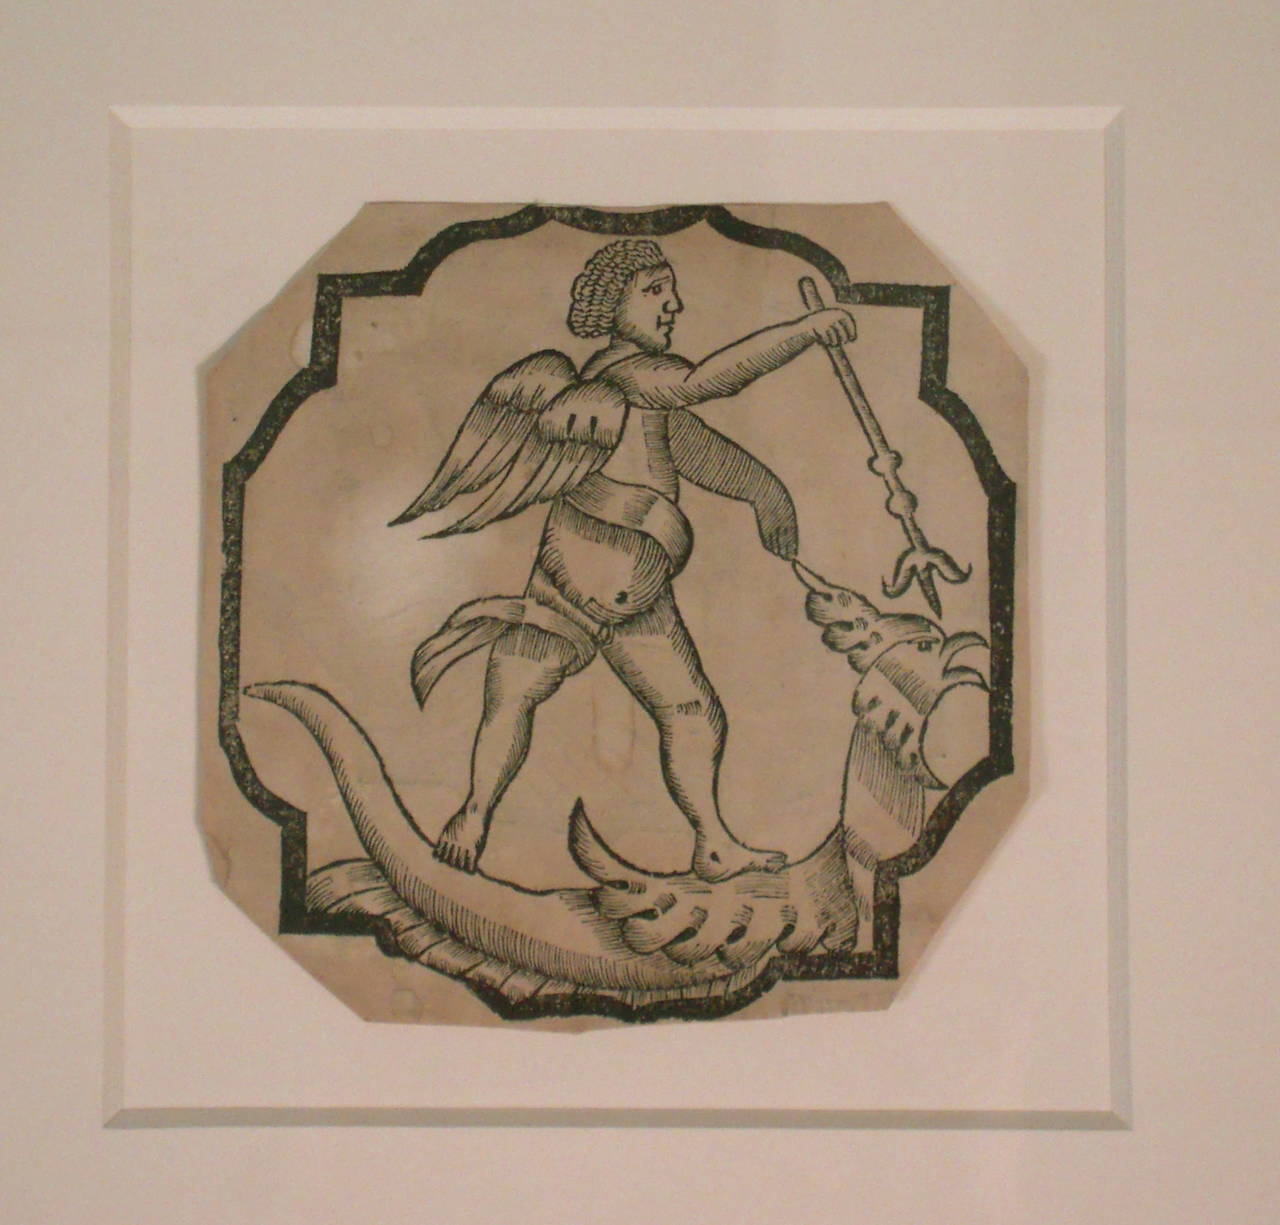 A charming, decorative early woodcut print on paper of Saint (Archangel) Michael slaying the dragon,16th century, within a bracketed square black border, trimmed as an octagon, newly, archivally framed--matte floated with 8-ply acid-free matte and